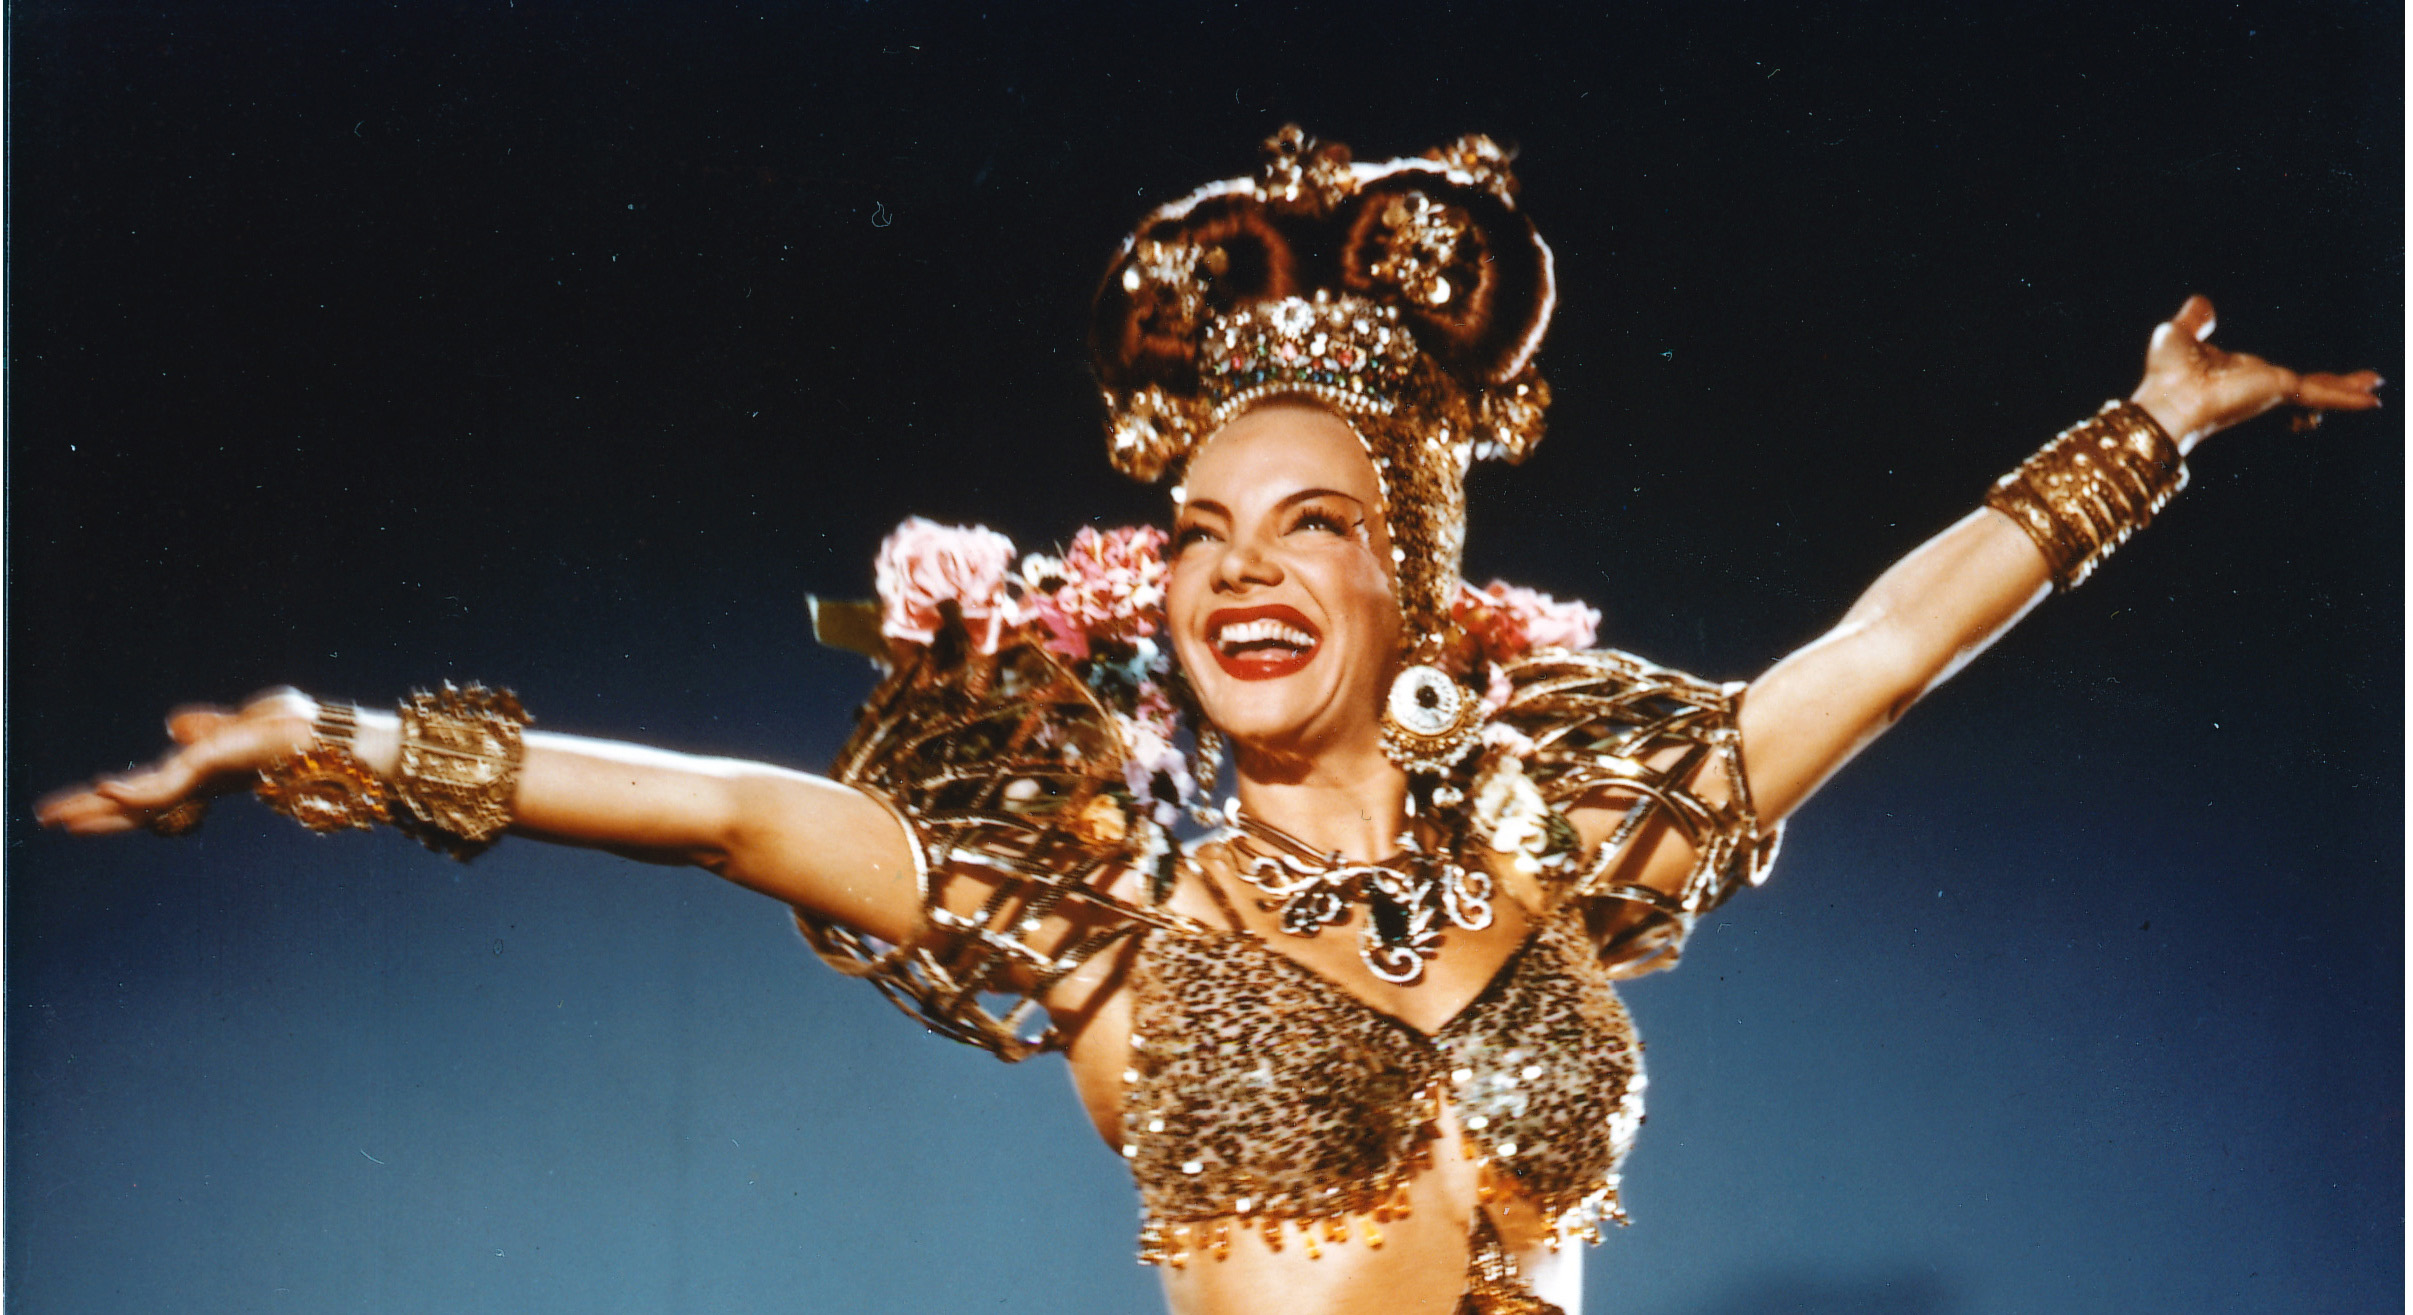 Singer Carmen Miranda Was Very Serious About Her Career